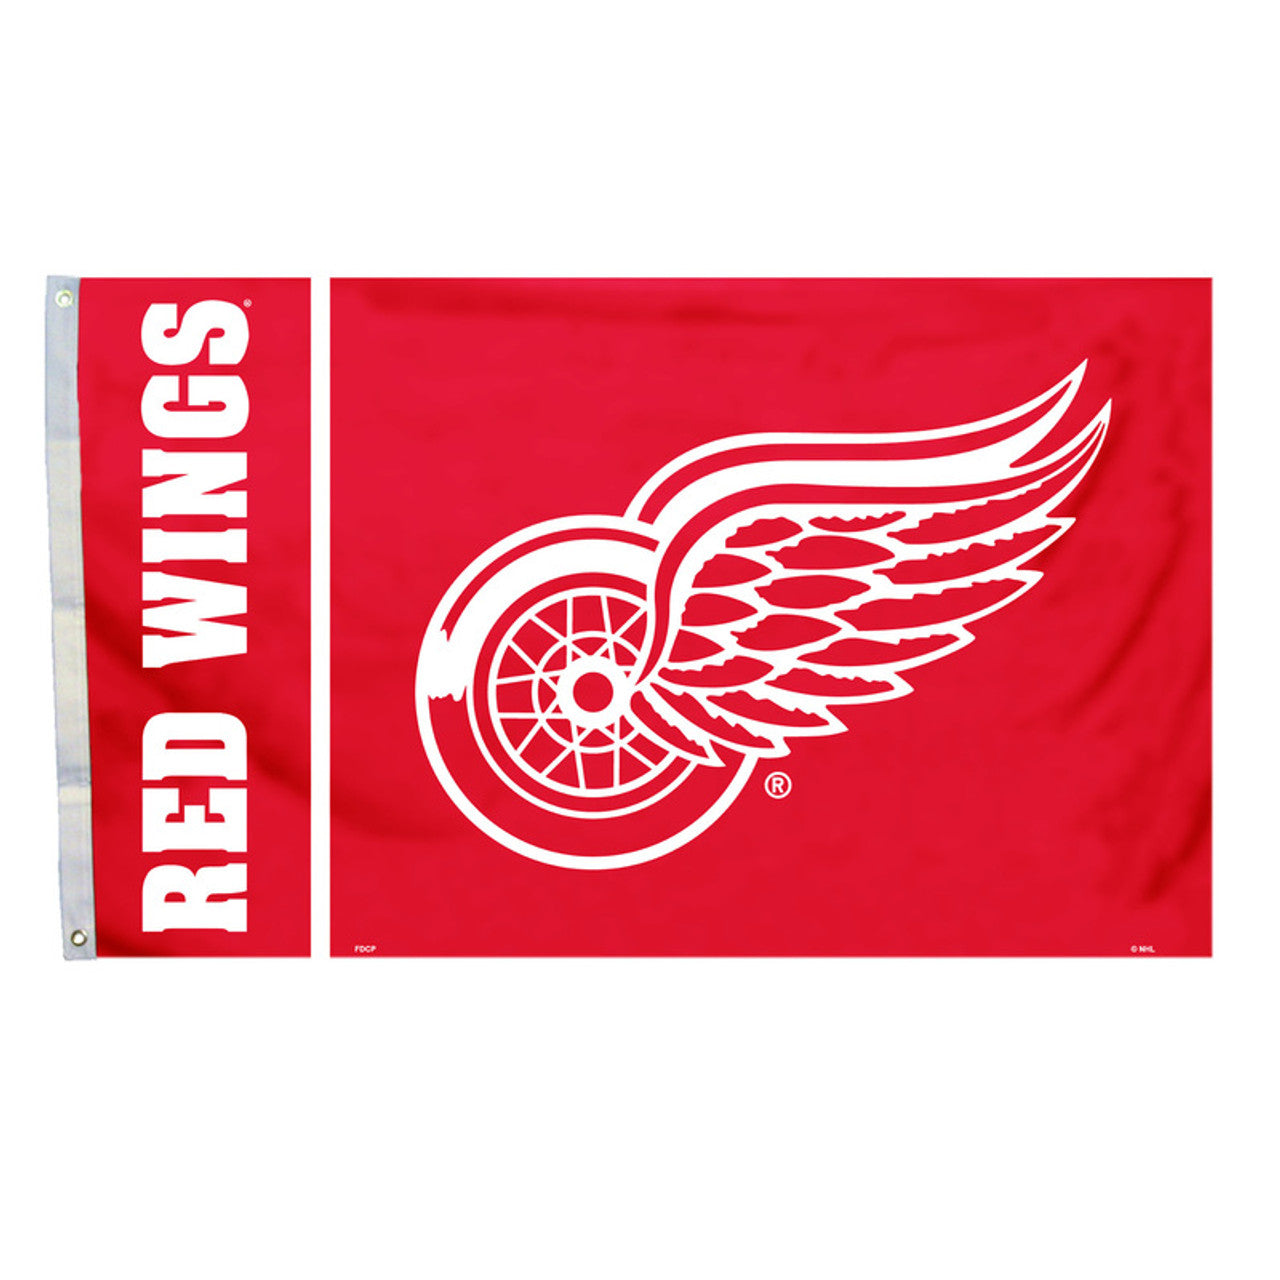 Detroit Red Wings 3' x 5' Banner Flag by Fremont Die